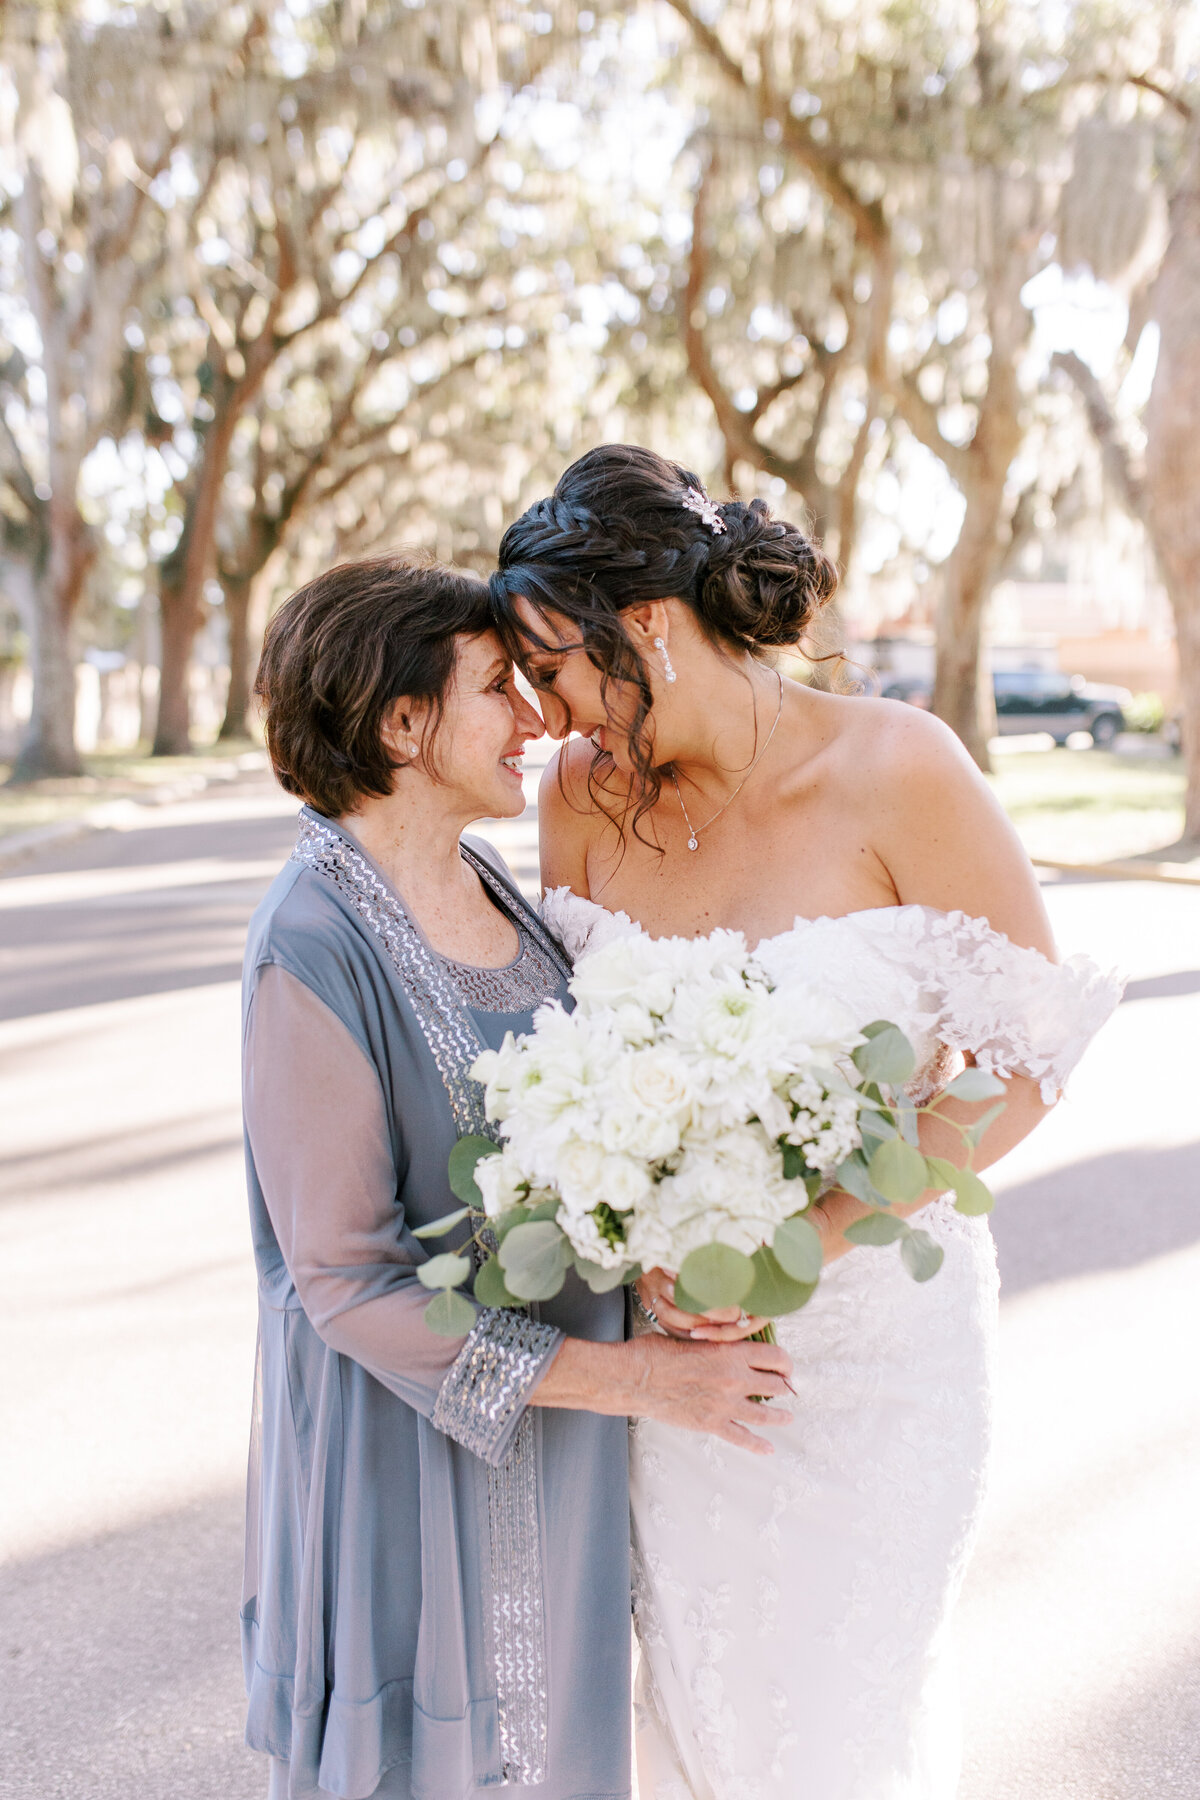 CAPTURED BY LAU PHOTOGRAPHY. Christina and John fountain of youth wedding st augustine fl-5732